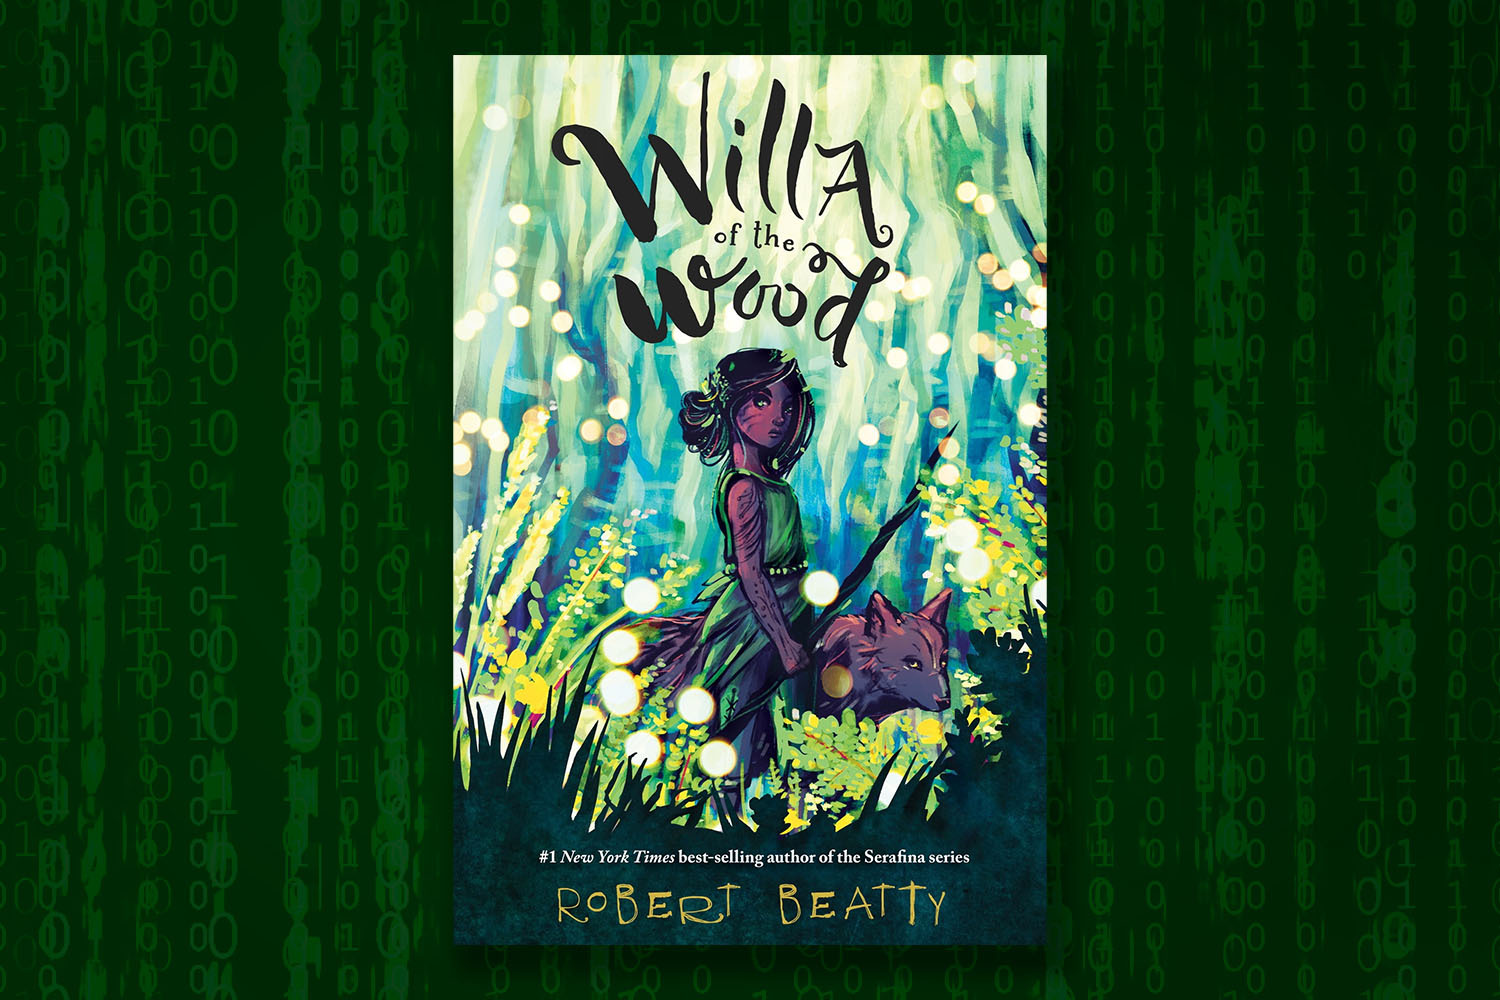 Willa of the Wood Book on background